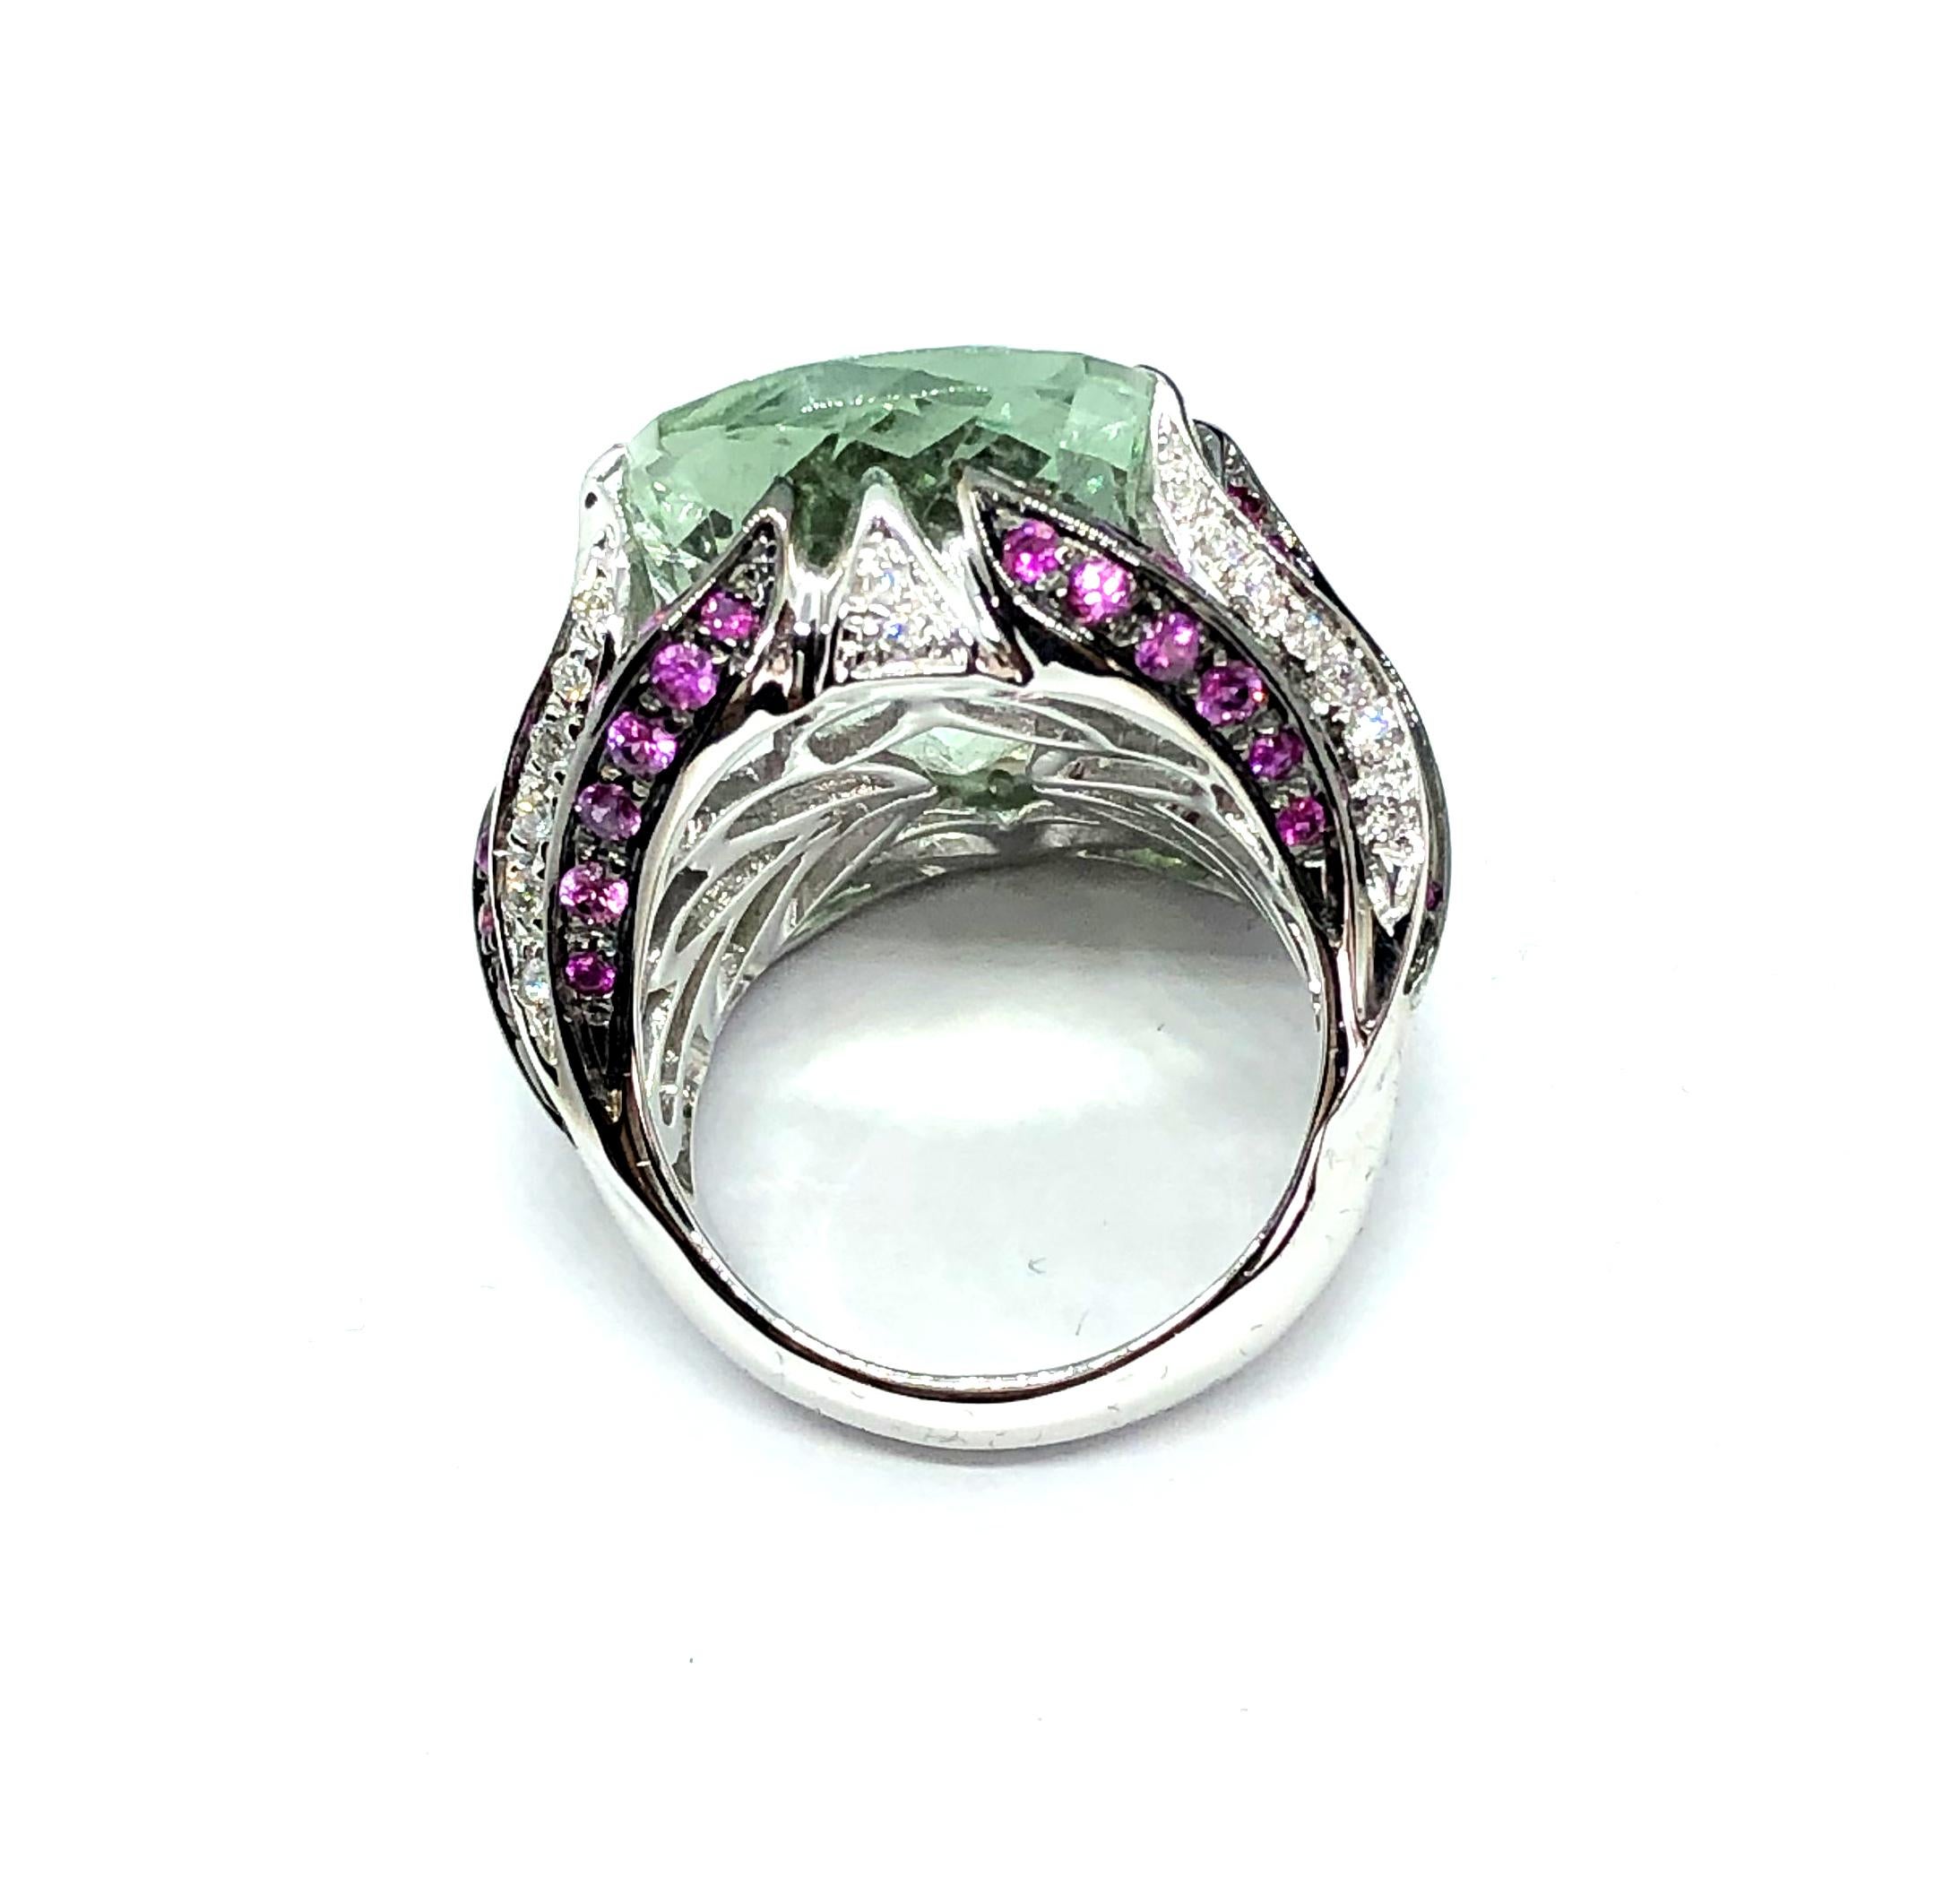 Women's or Men's 23 Ct Green Prasiolite White Gold Cocktail Ring Diamond and Pink Sapphires Flame For Sale